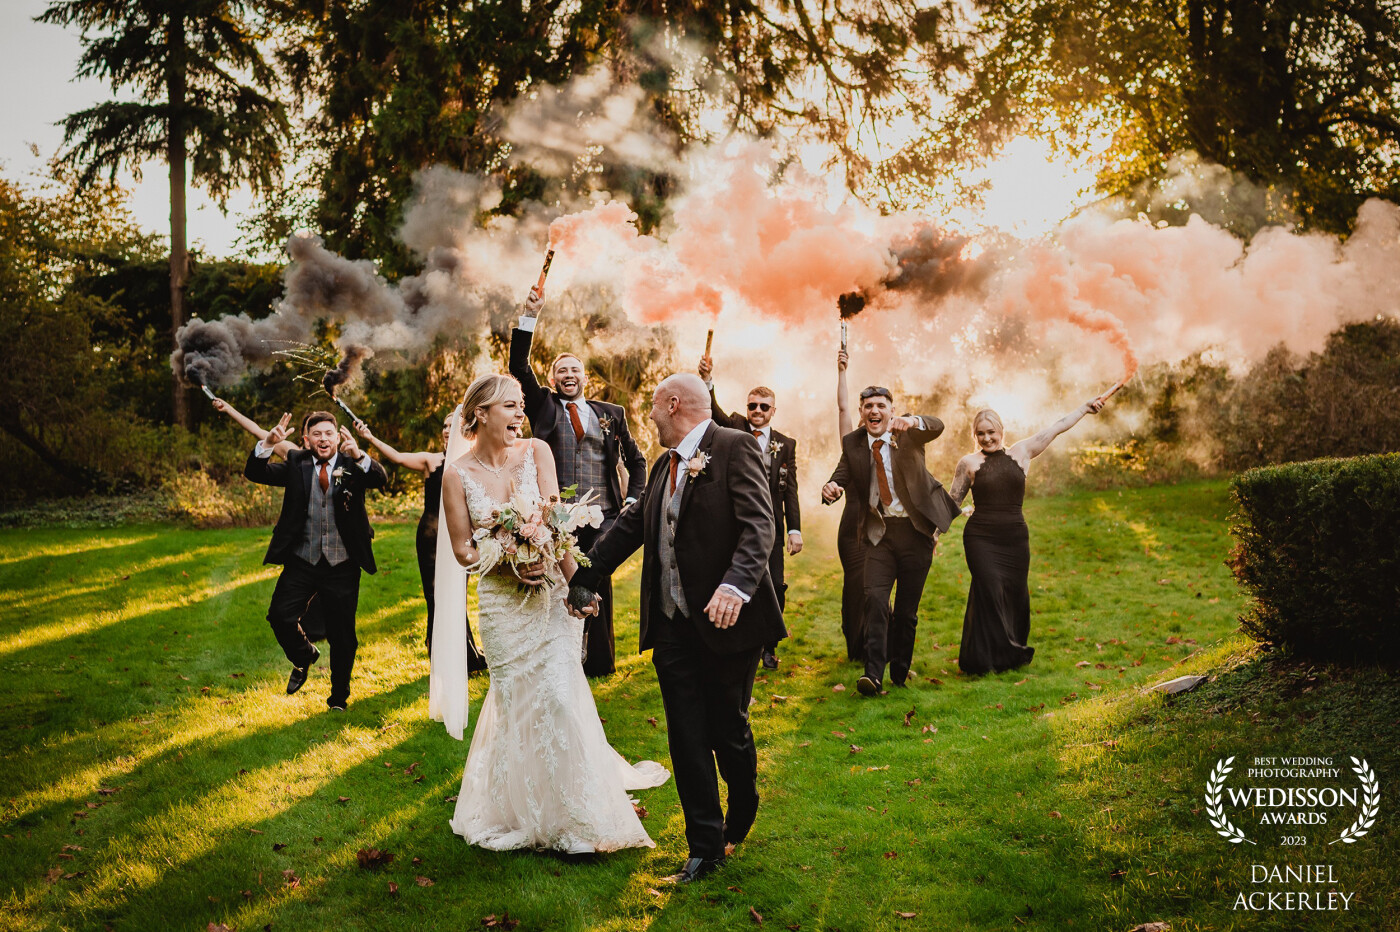 The golden hour hit just right as I was wrapping up my portrait session with Megan & Daniel, so their wedding party grabbed some smoke grenades and it made for a really fantastic back-lit scene!